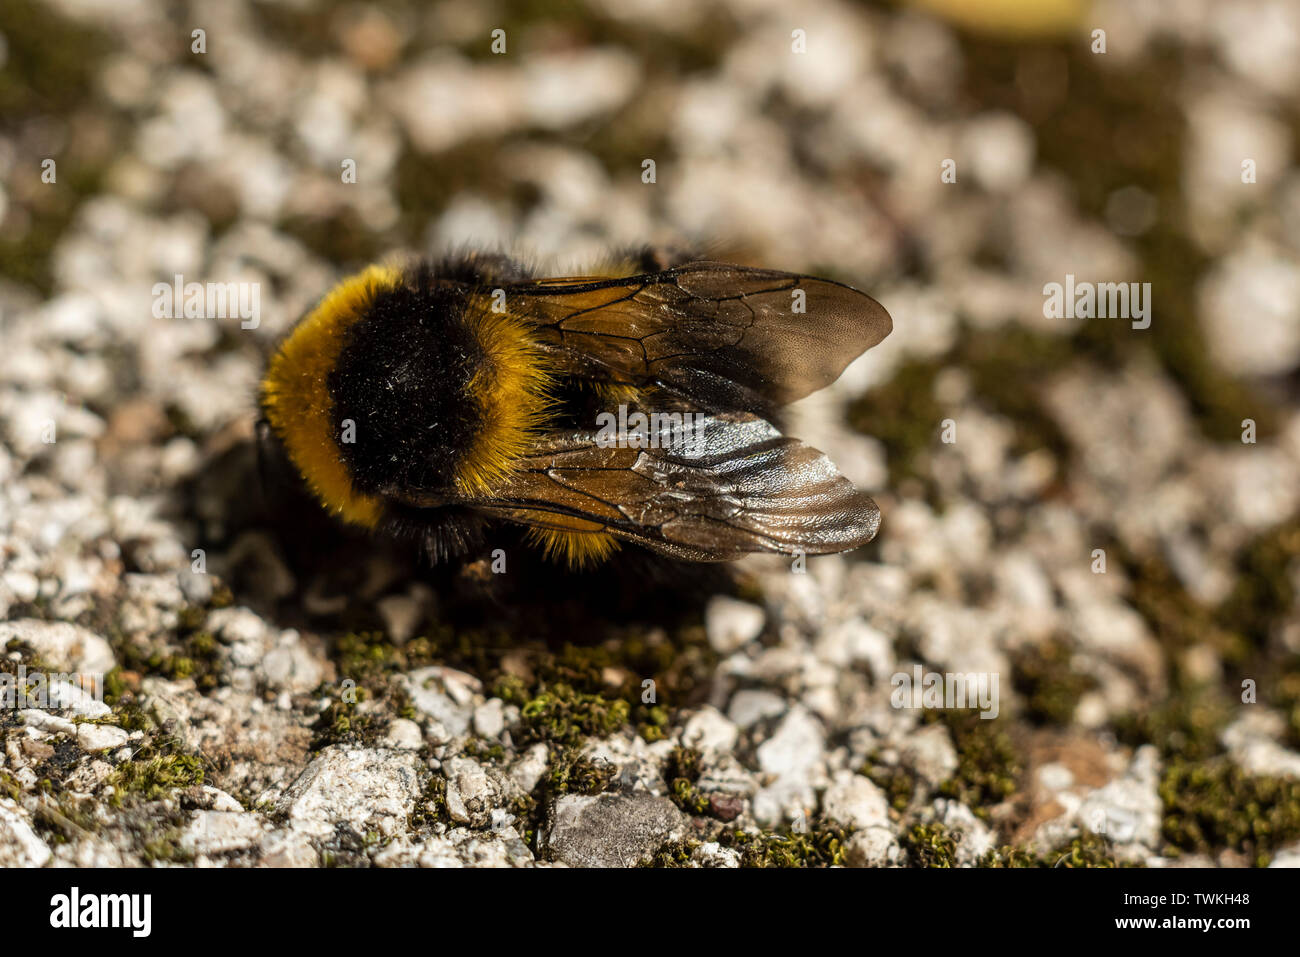 Dead Bumblebee on rocky ground, back view Stock Photo